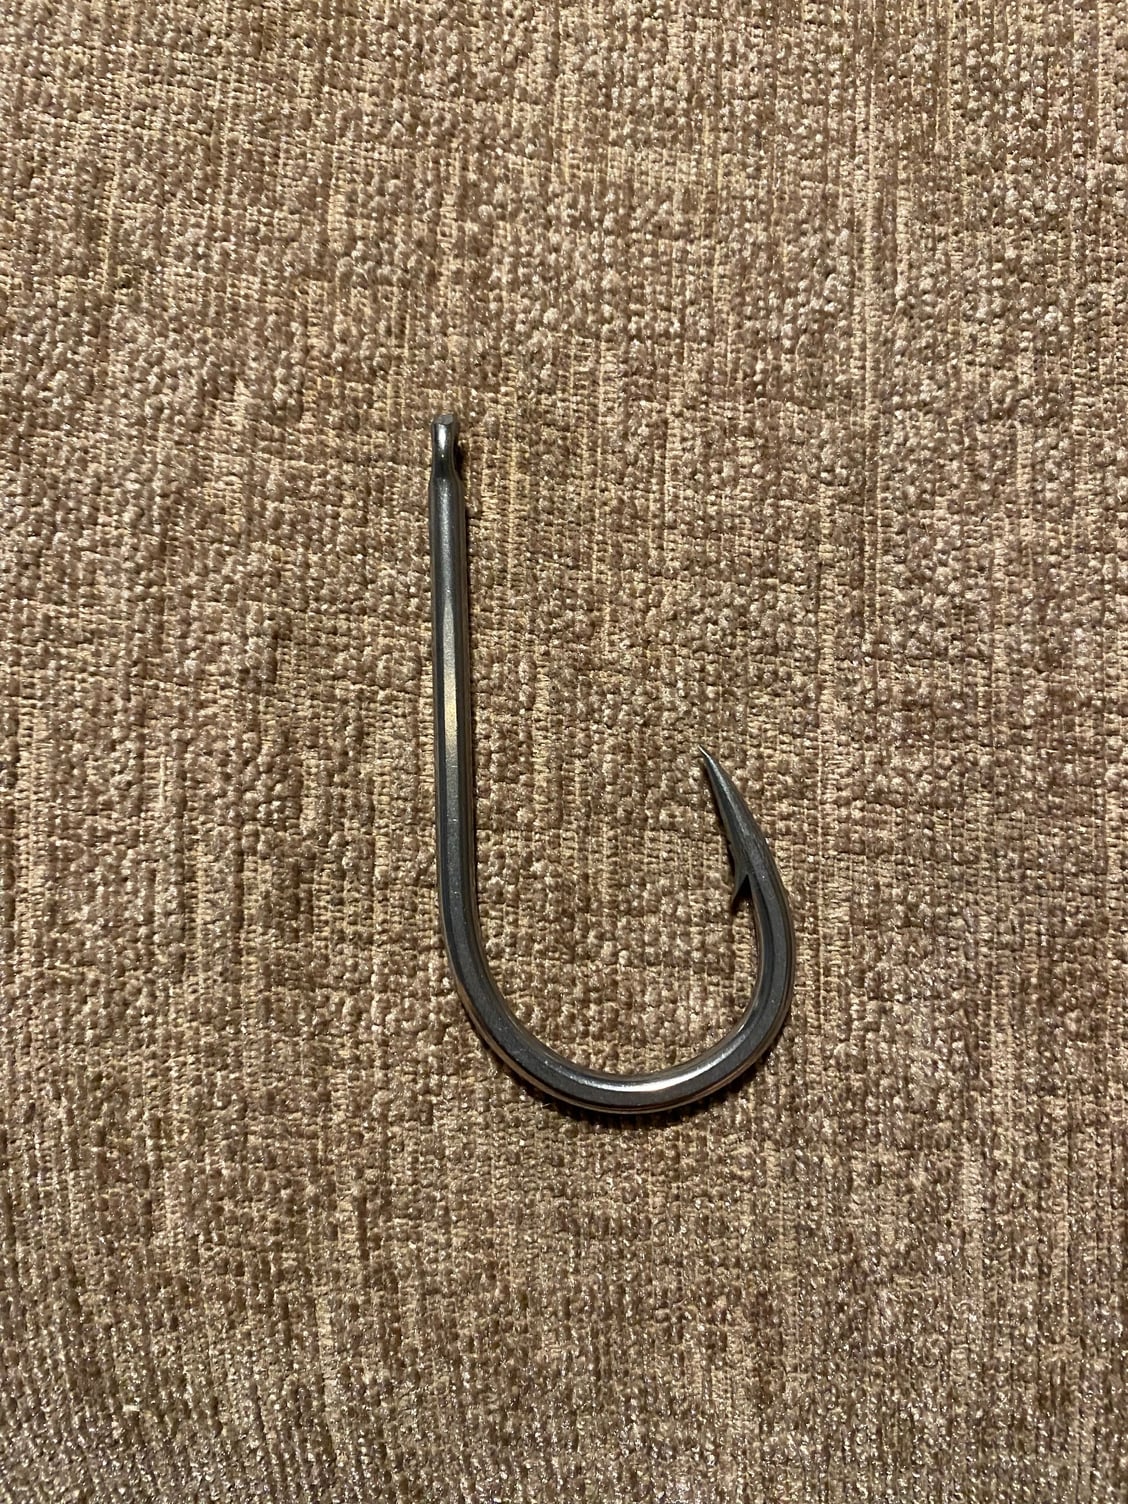 Halco Max 130 hook replacement - The Hull Truth - Boating and Fishing Forum